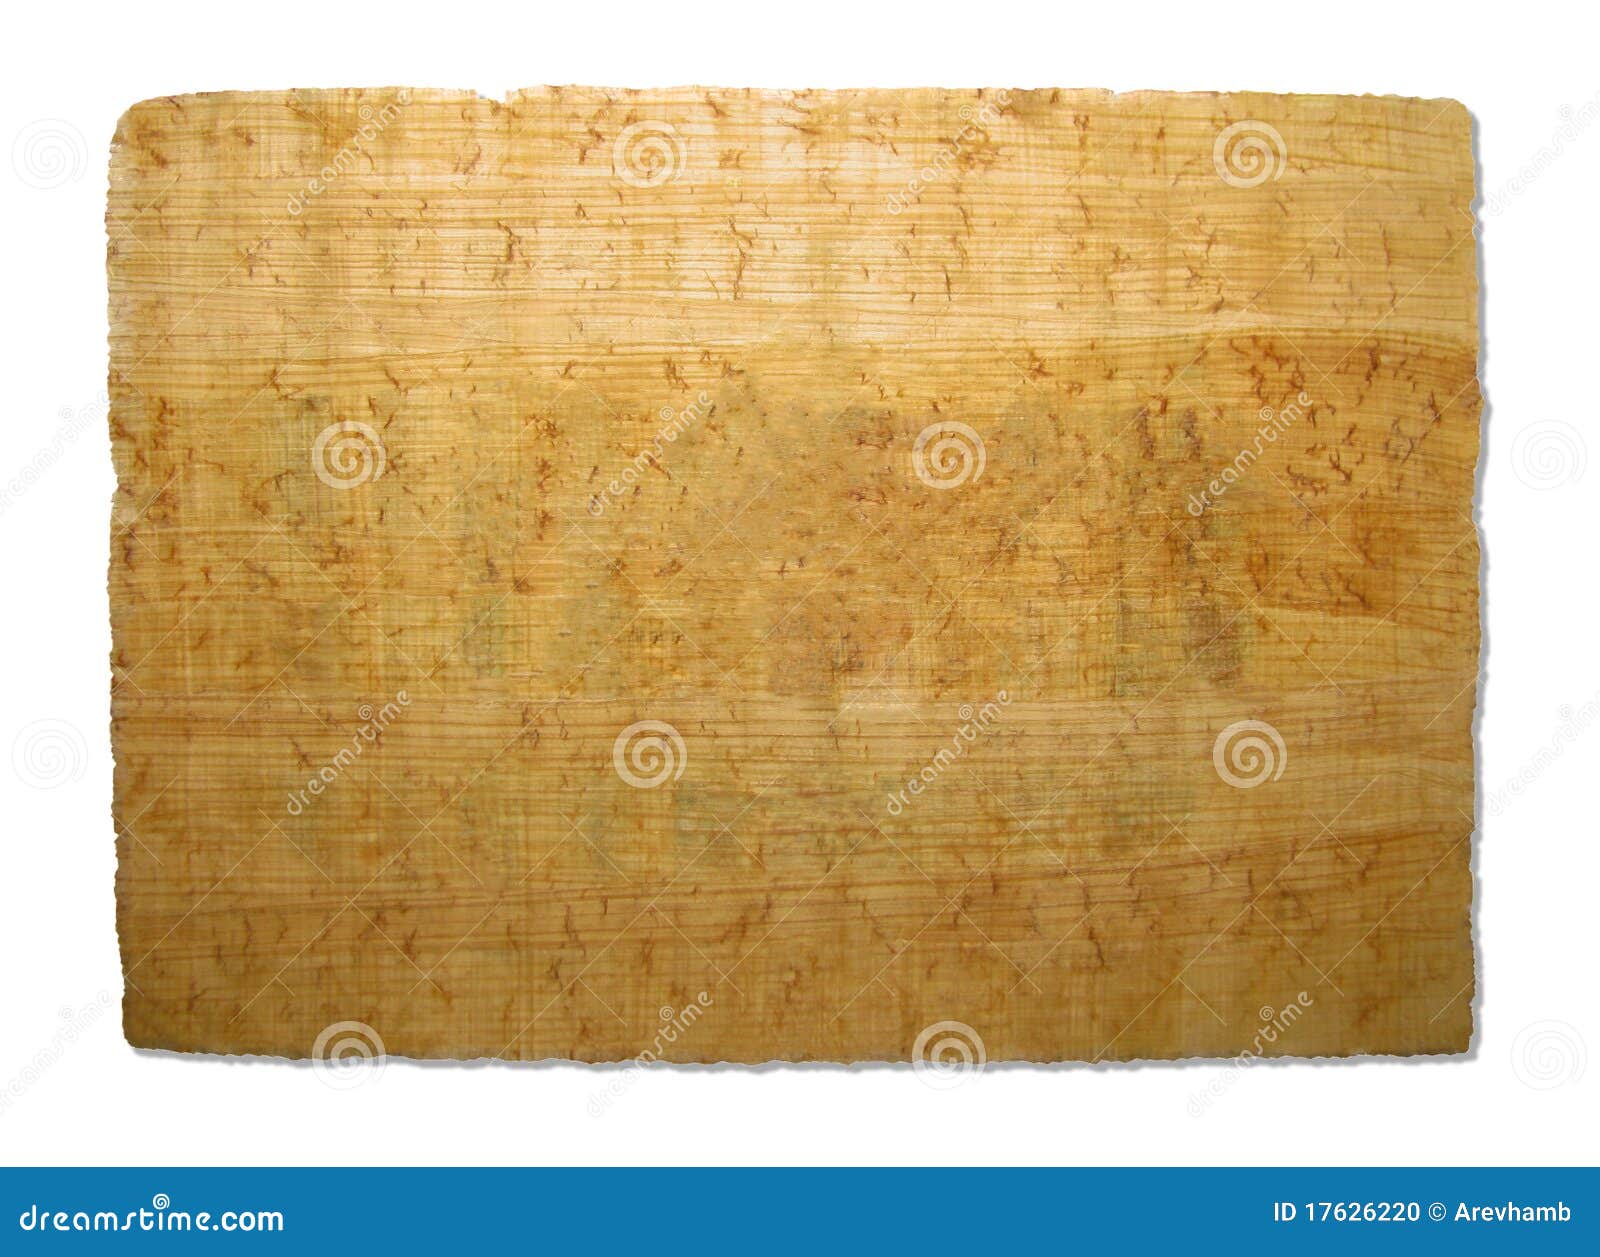 old piece of papyrus texture